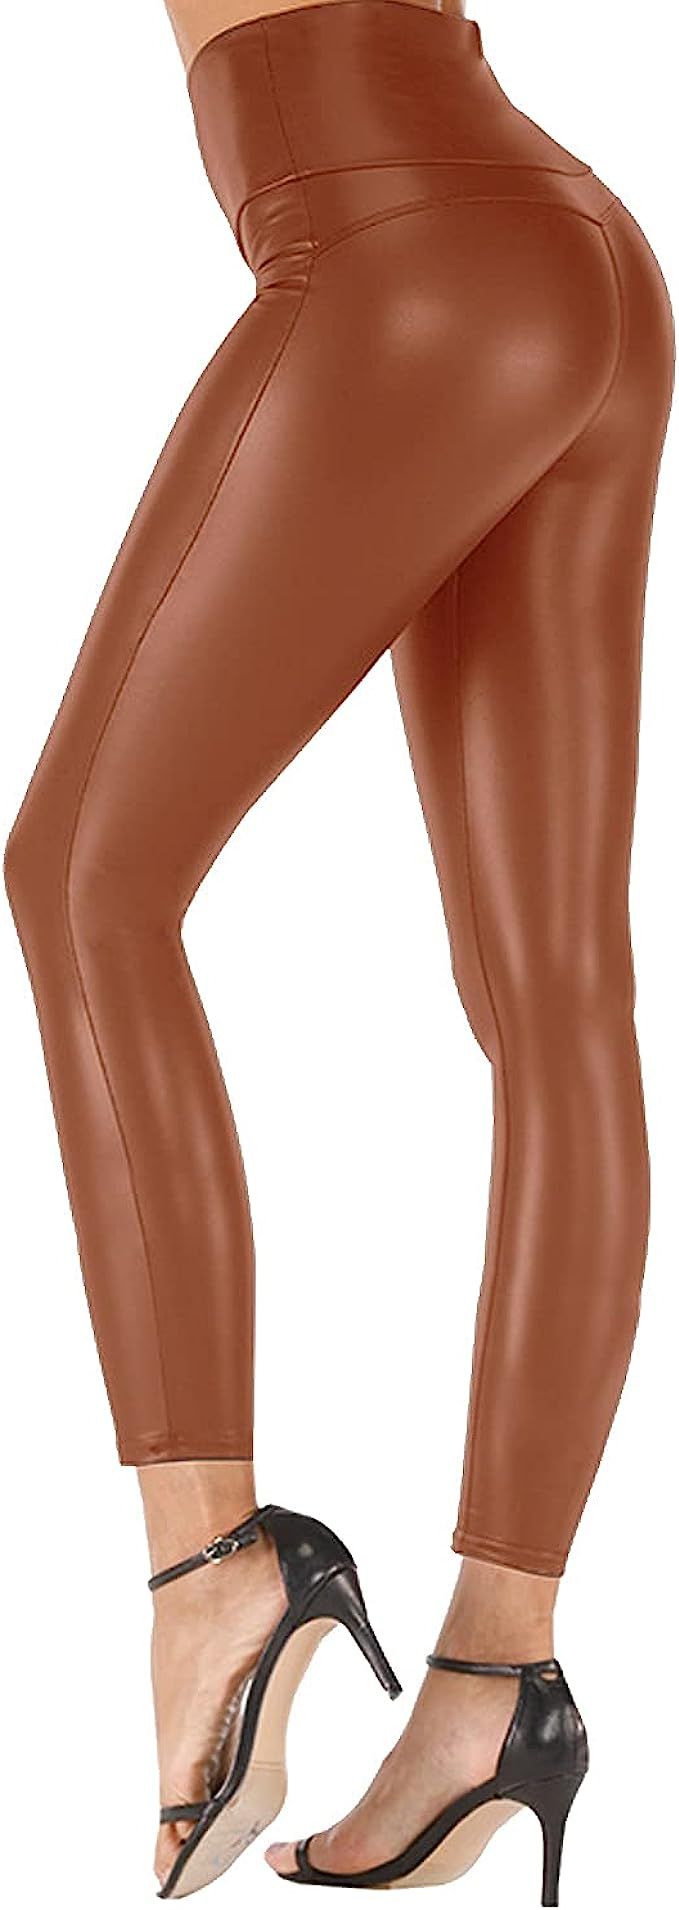 Tulucky Stretchy High Waisted Tights Faux Leather Leggings Pants for Women Regular - Plus Size at... | Amazon (US)